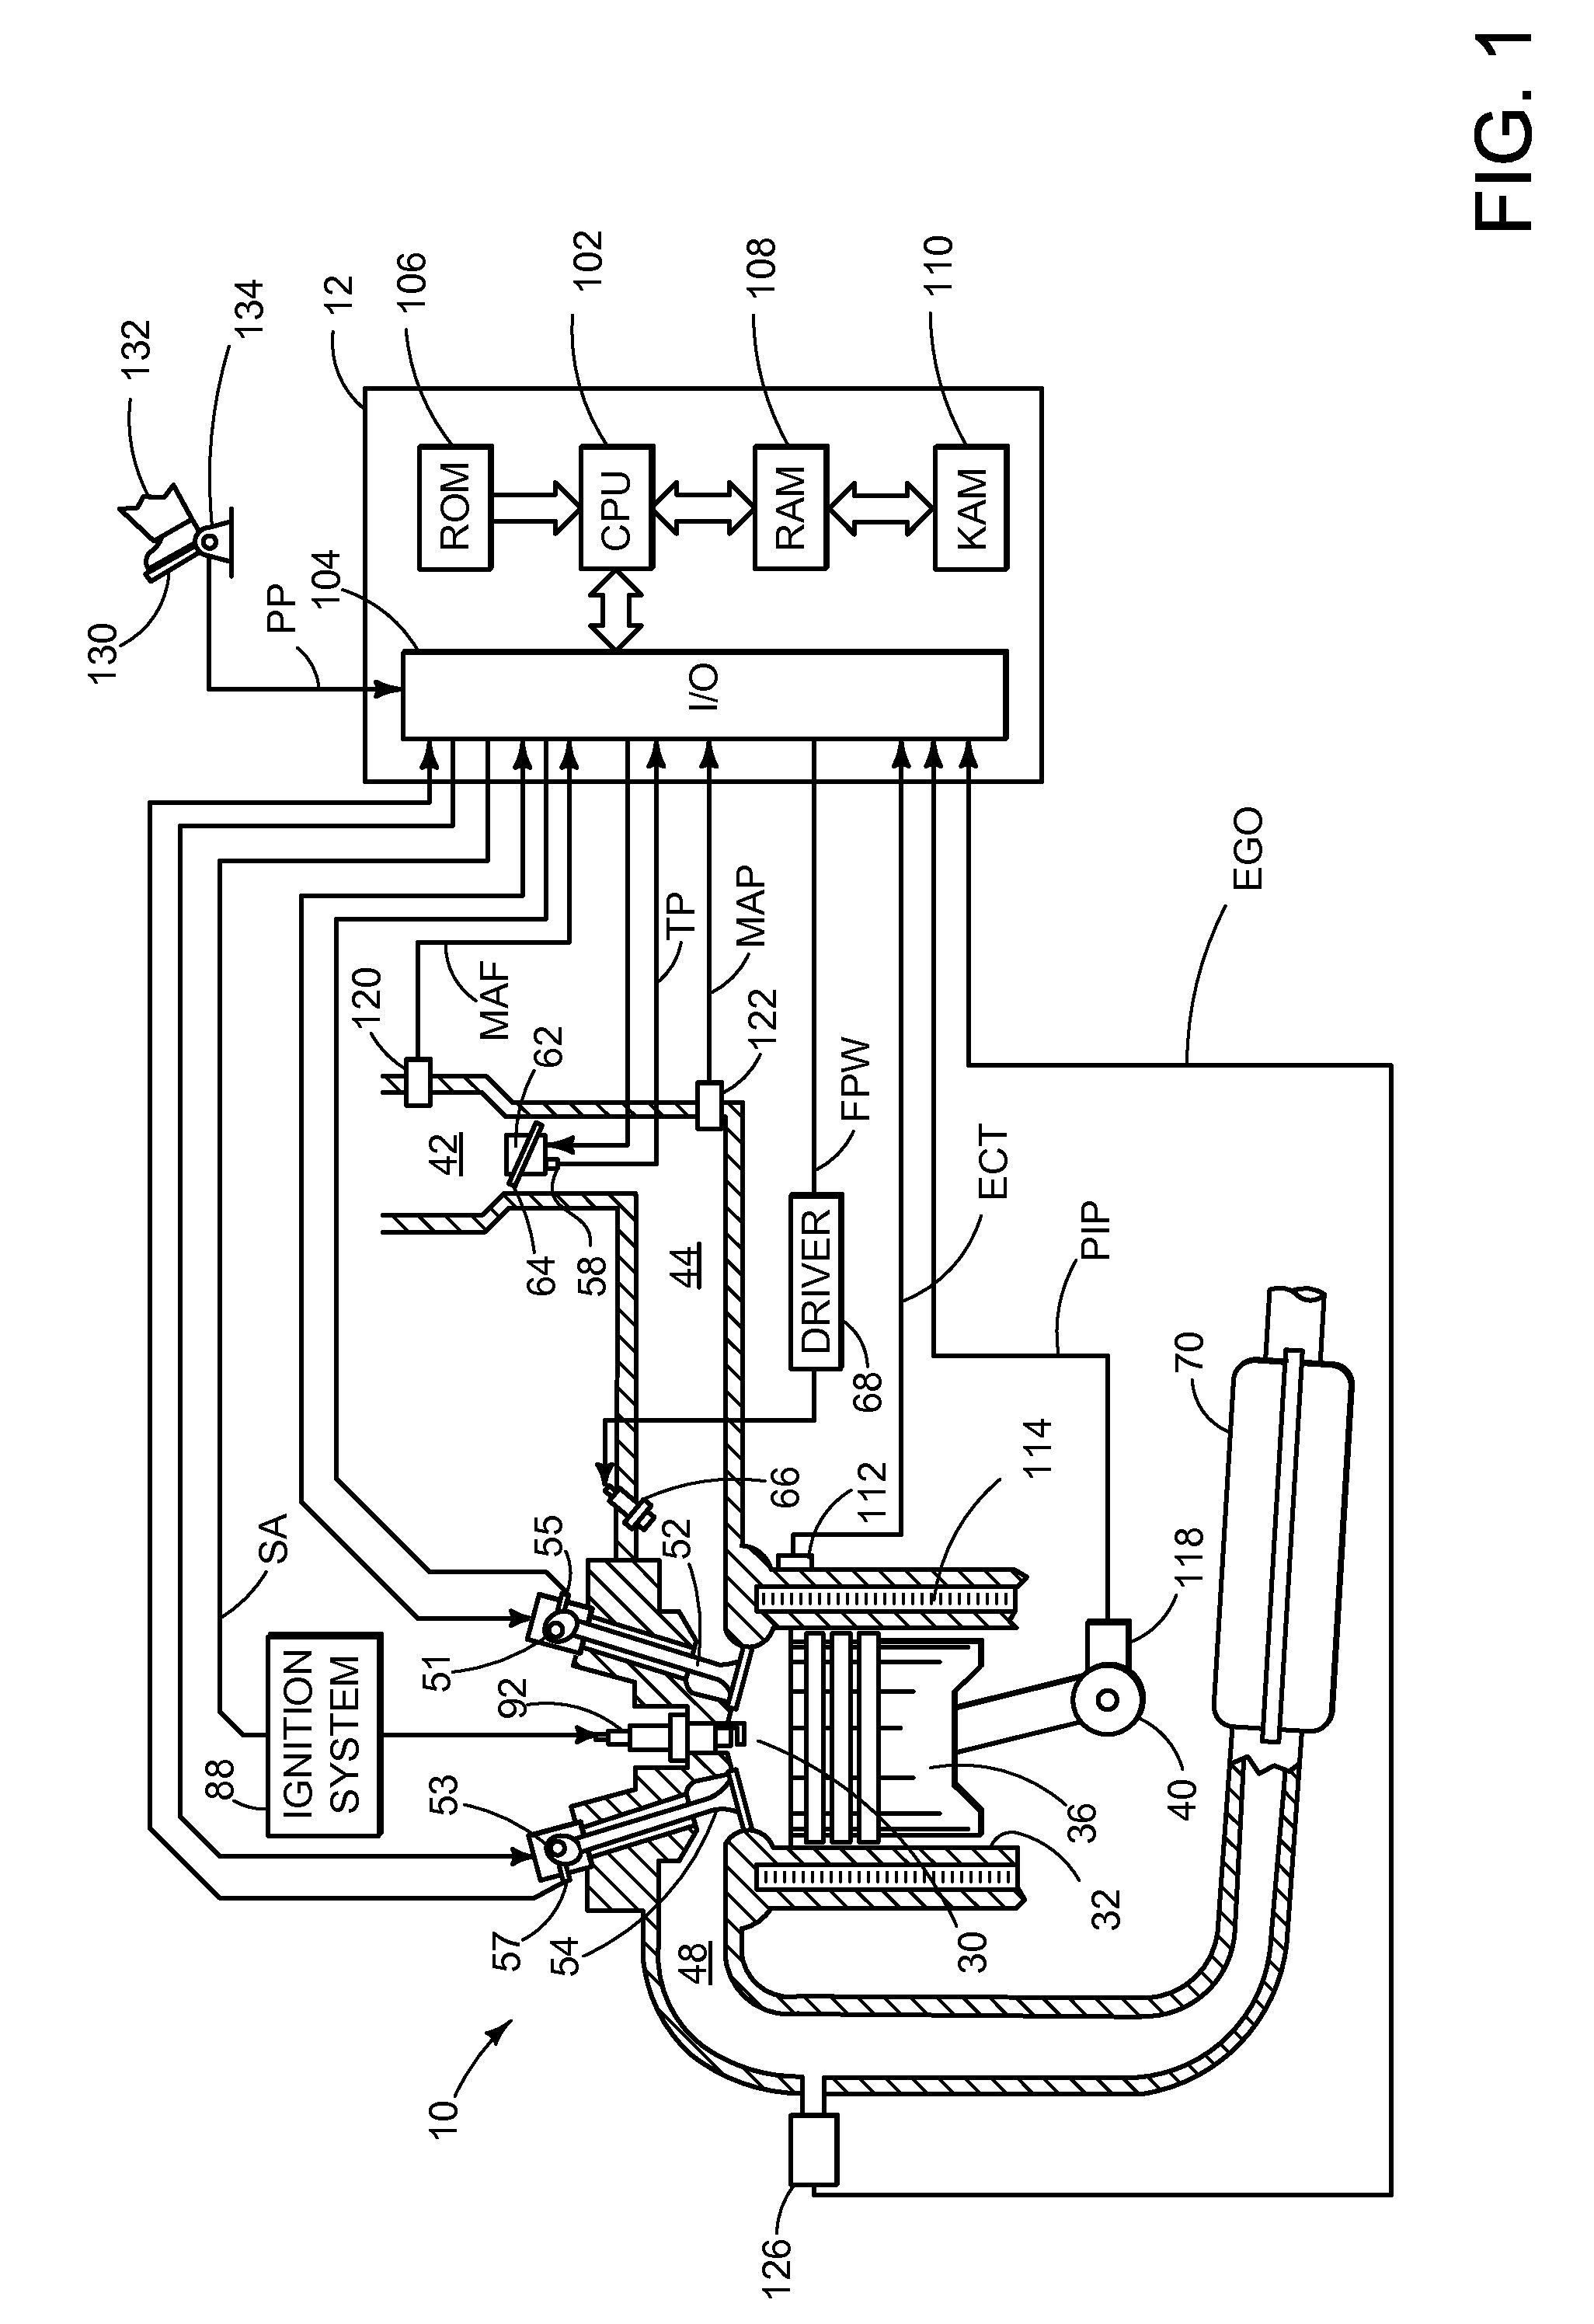 System for improving gas distribution in an intake manifold